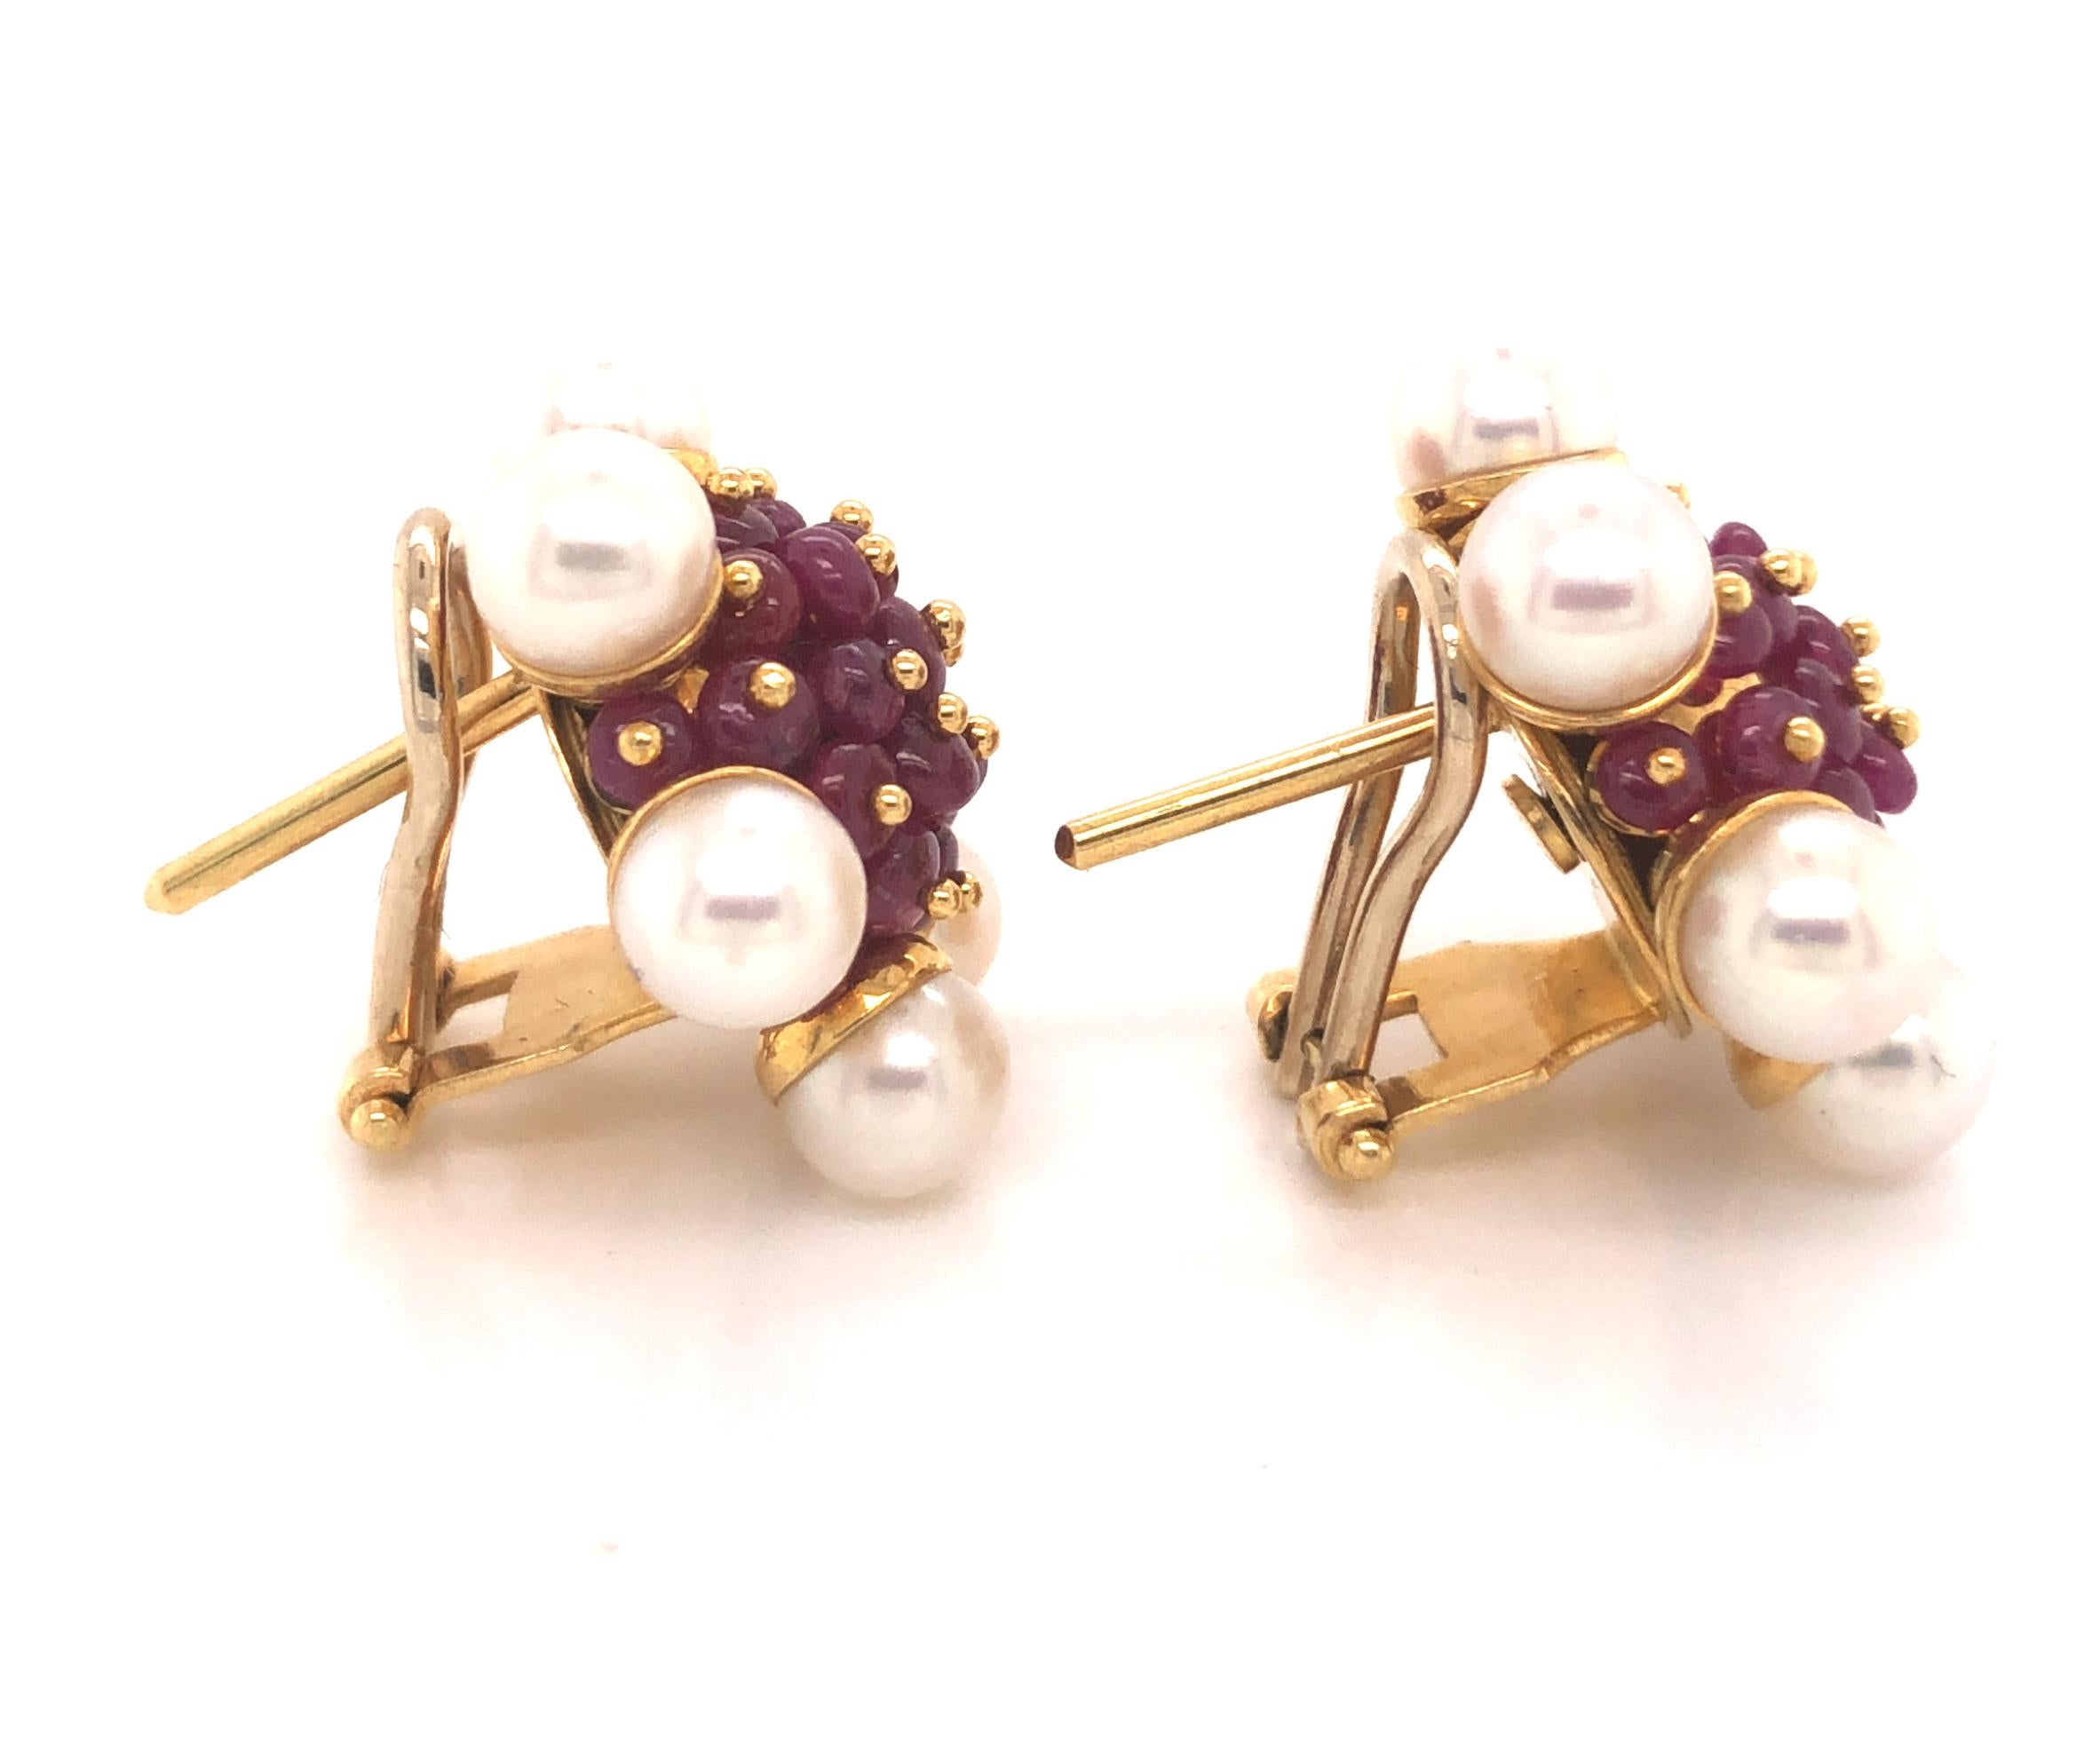 Beautiful pair of earrings crafted in 18k yellow gold.  This cluster design of earrings is truly fantastic. Pearls decorate the outside of the design as bead seat rubies highlight the inside of the earring. The rubies are set with gold tips giving